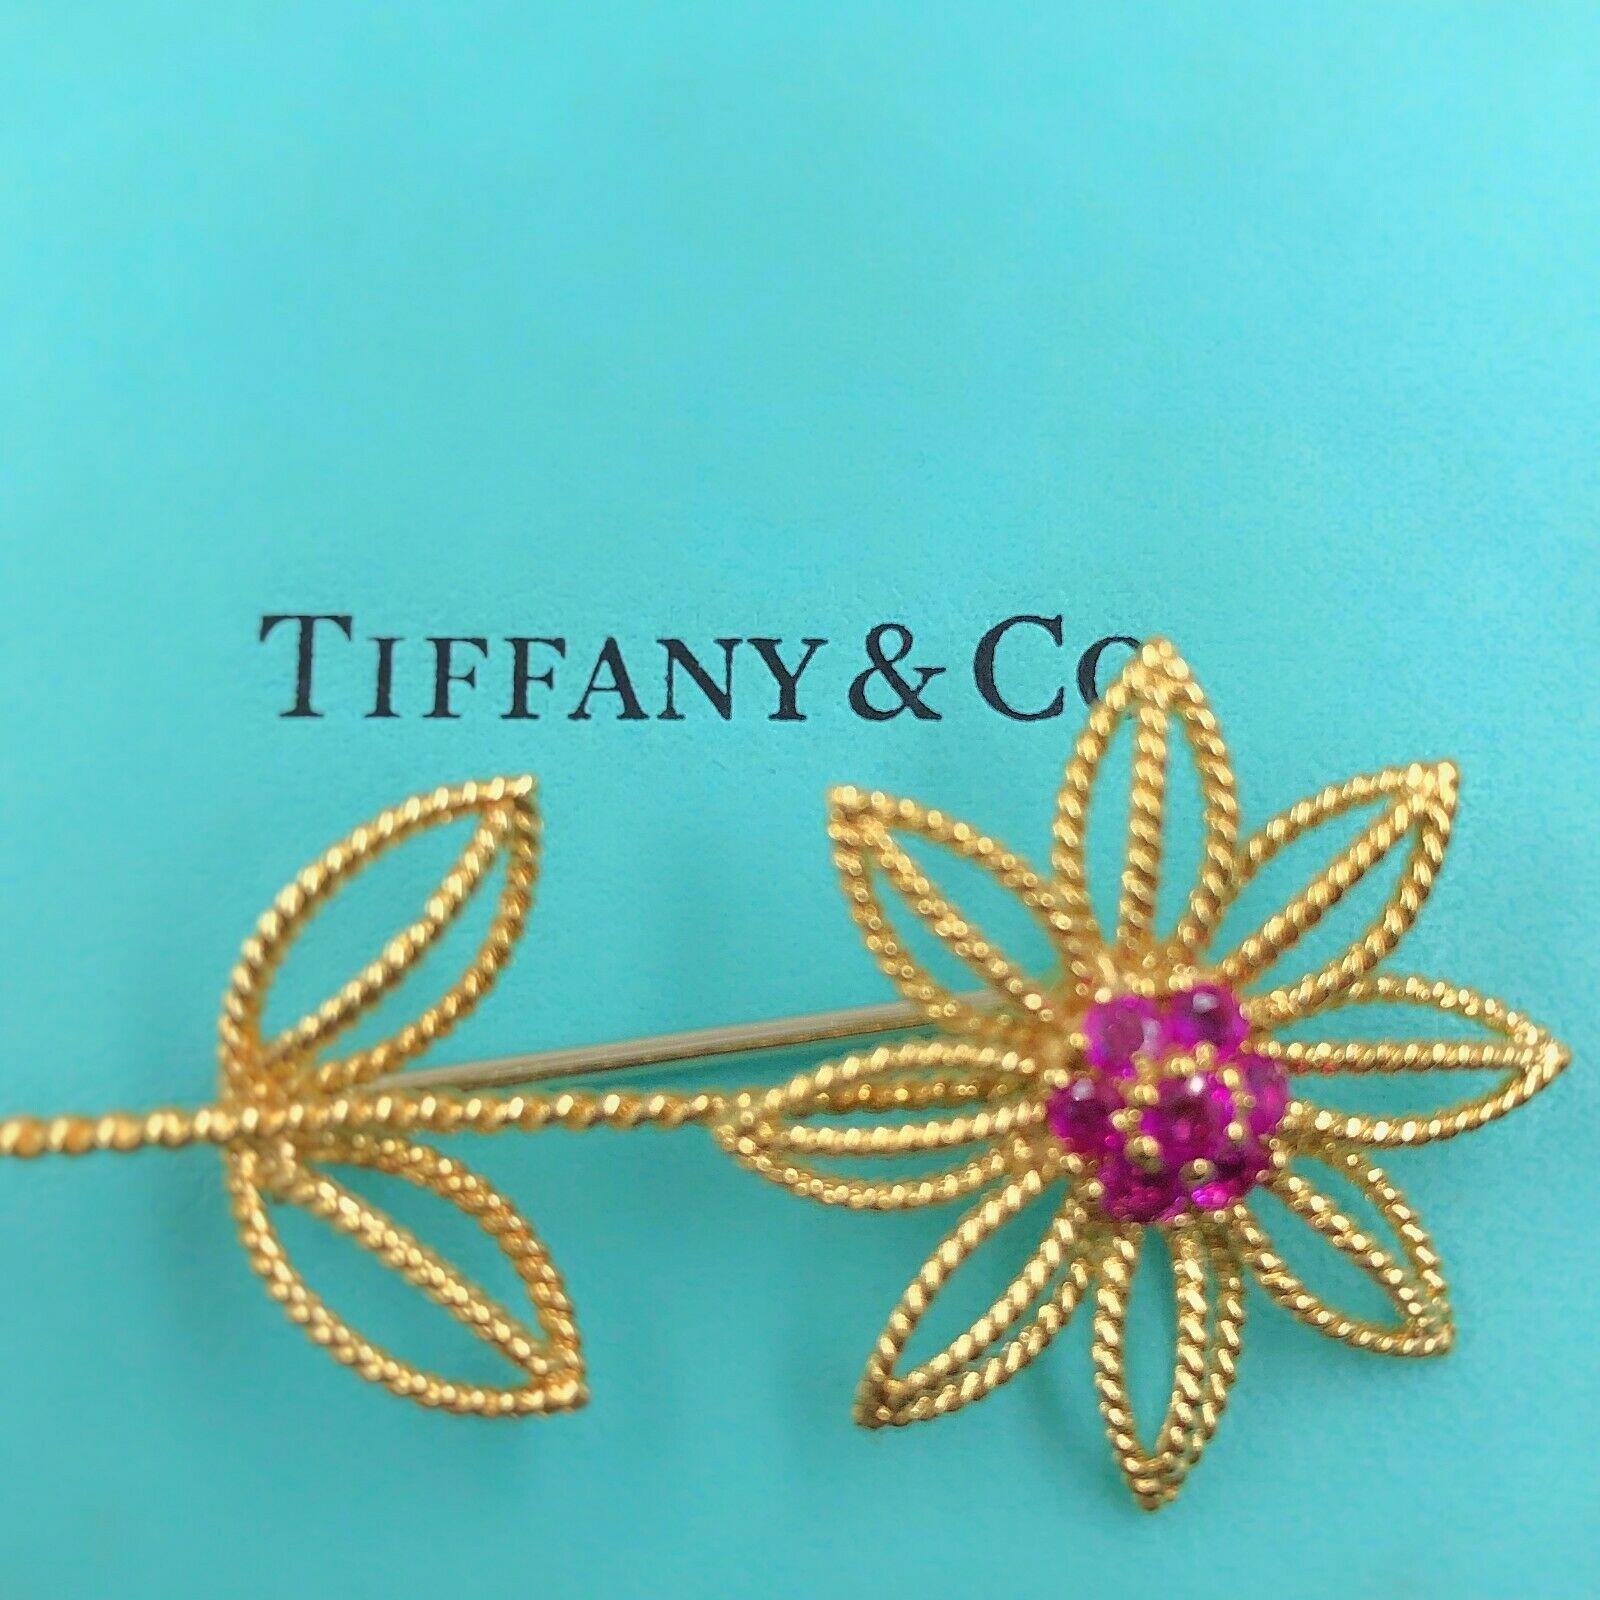 Tiffany & Co.
Style: Pin / Brooch
Metal: 18k Yellow Gold
Measurements:  2 Inches X 1 Inches
Gemstones:  7 Bright Red Rubles weighing approximately 1/2 tcw.
Hallmark:  